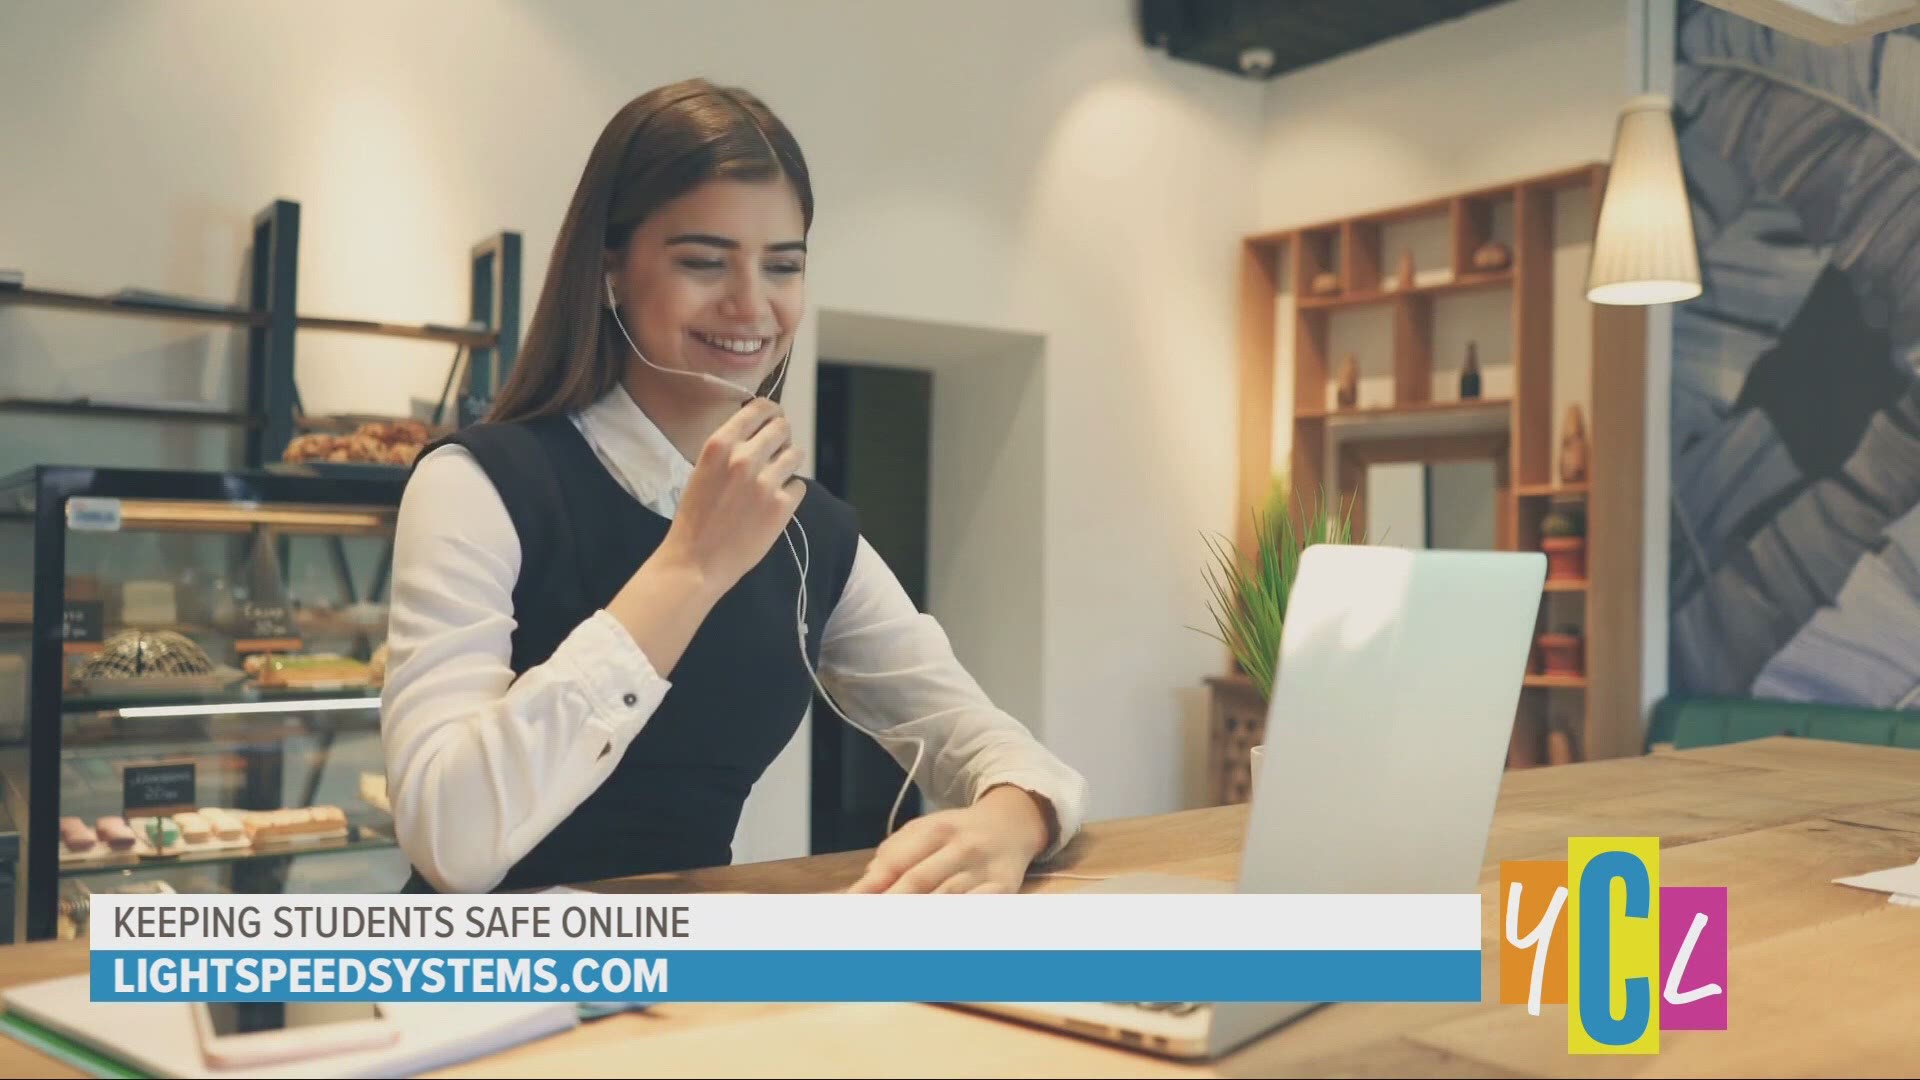 Online safety for students, parents top concerns and what software to consider while students learn from home. This segment was paid for by Lightspeed Systems.